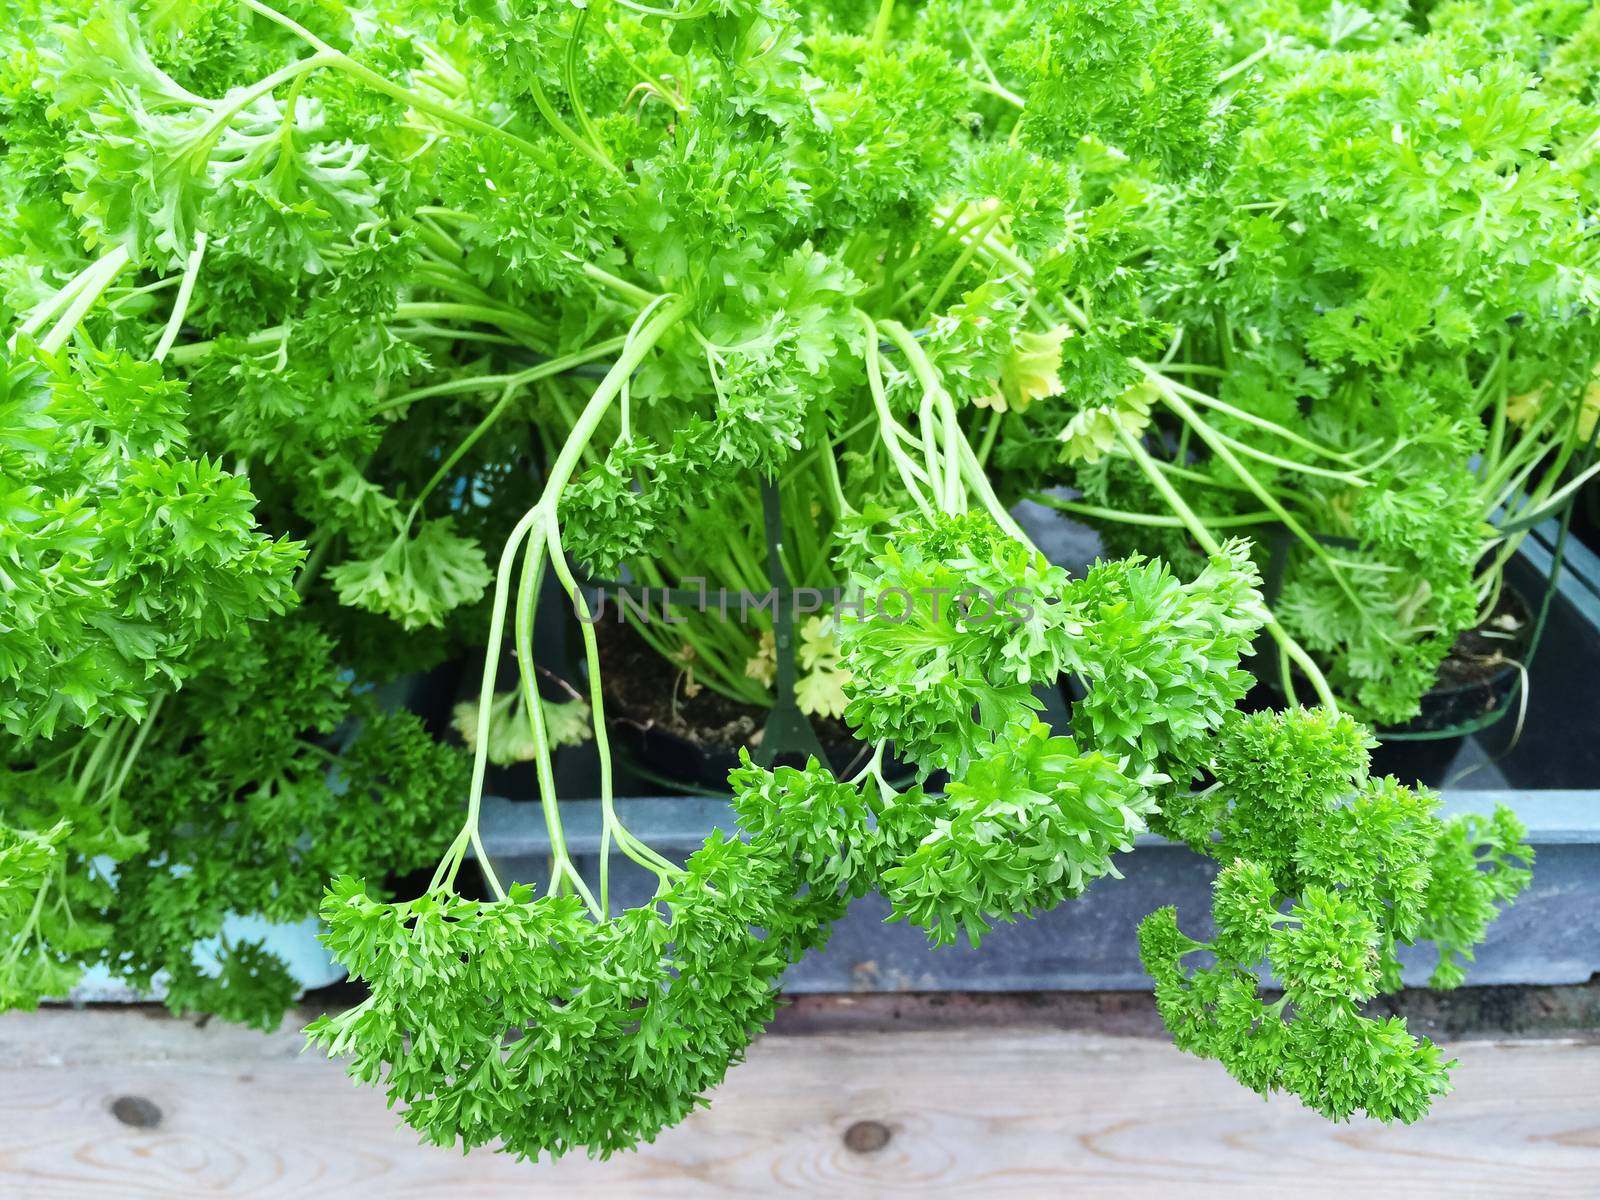 Curly parsley growing in pots by anikasalsera